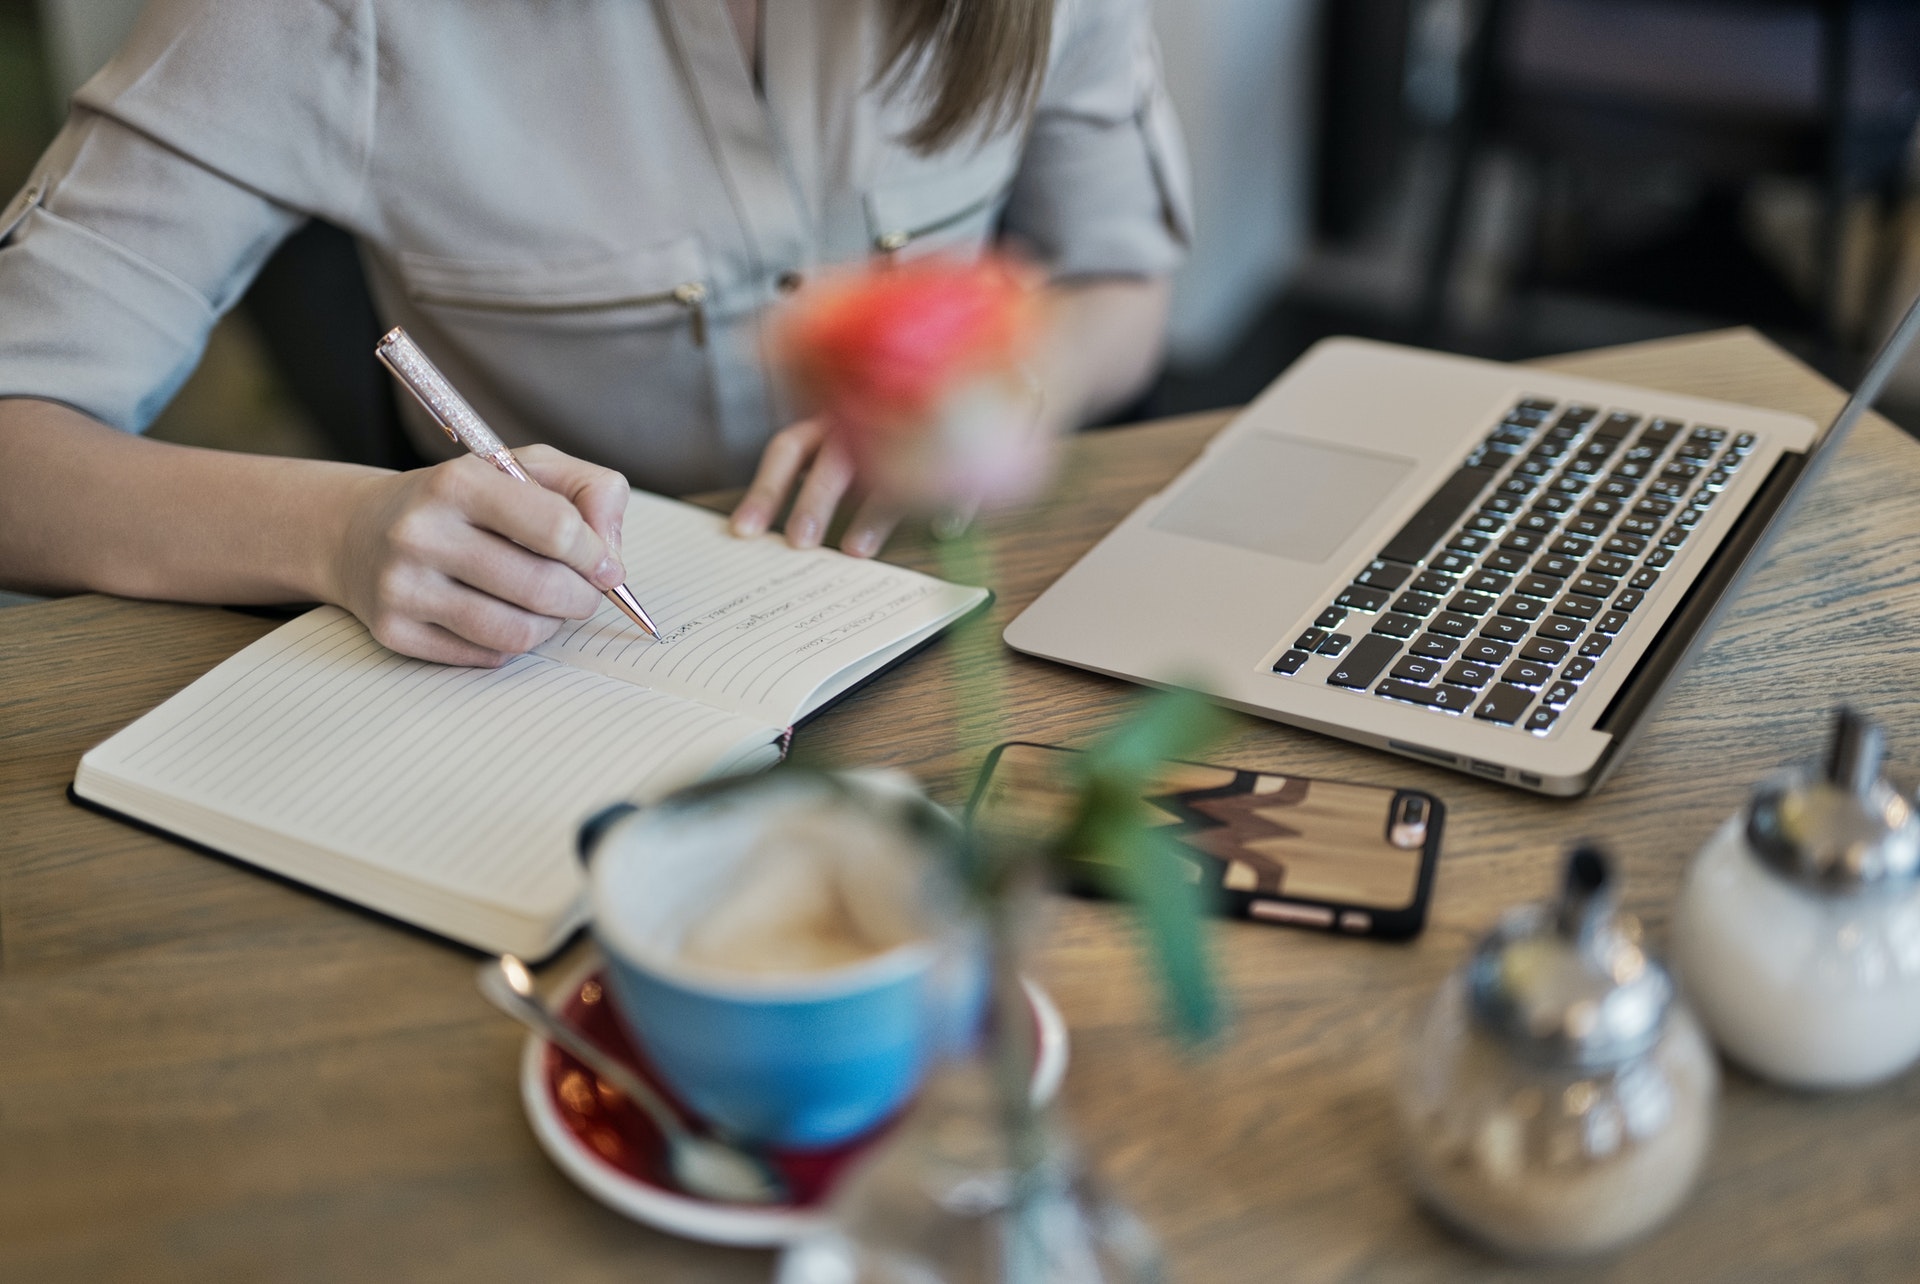 Woman sat at a table, writing in a notebook, coffee cup, laptop, salt & pepper shaker and a vase with a single orange rose slightly out of focus